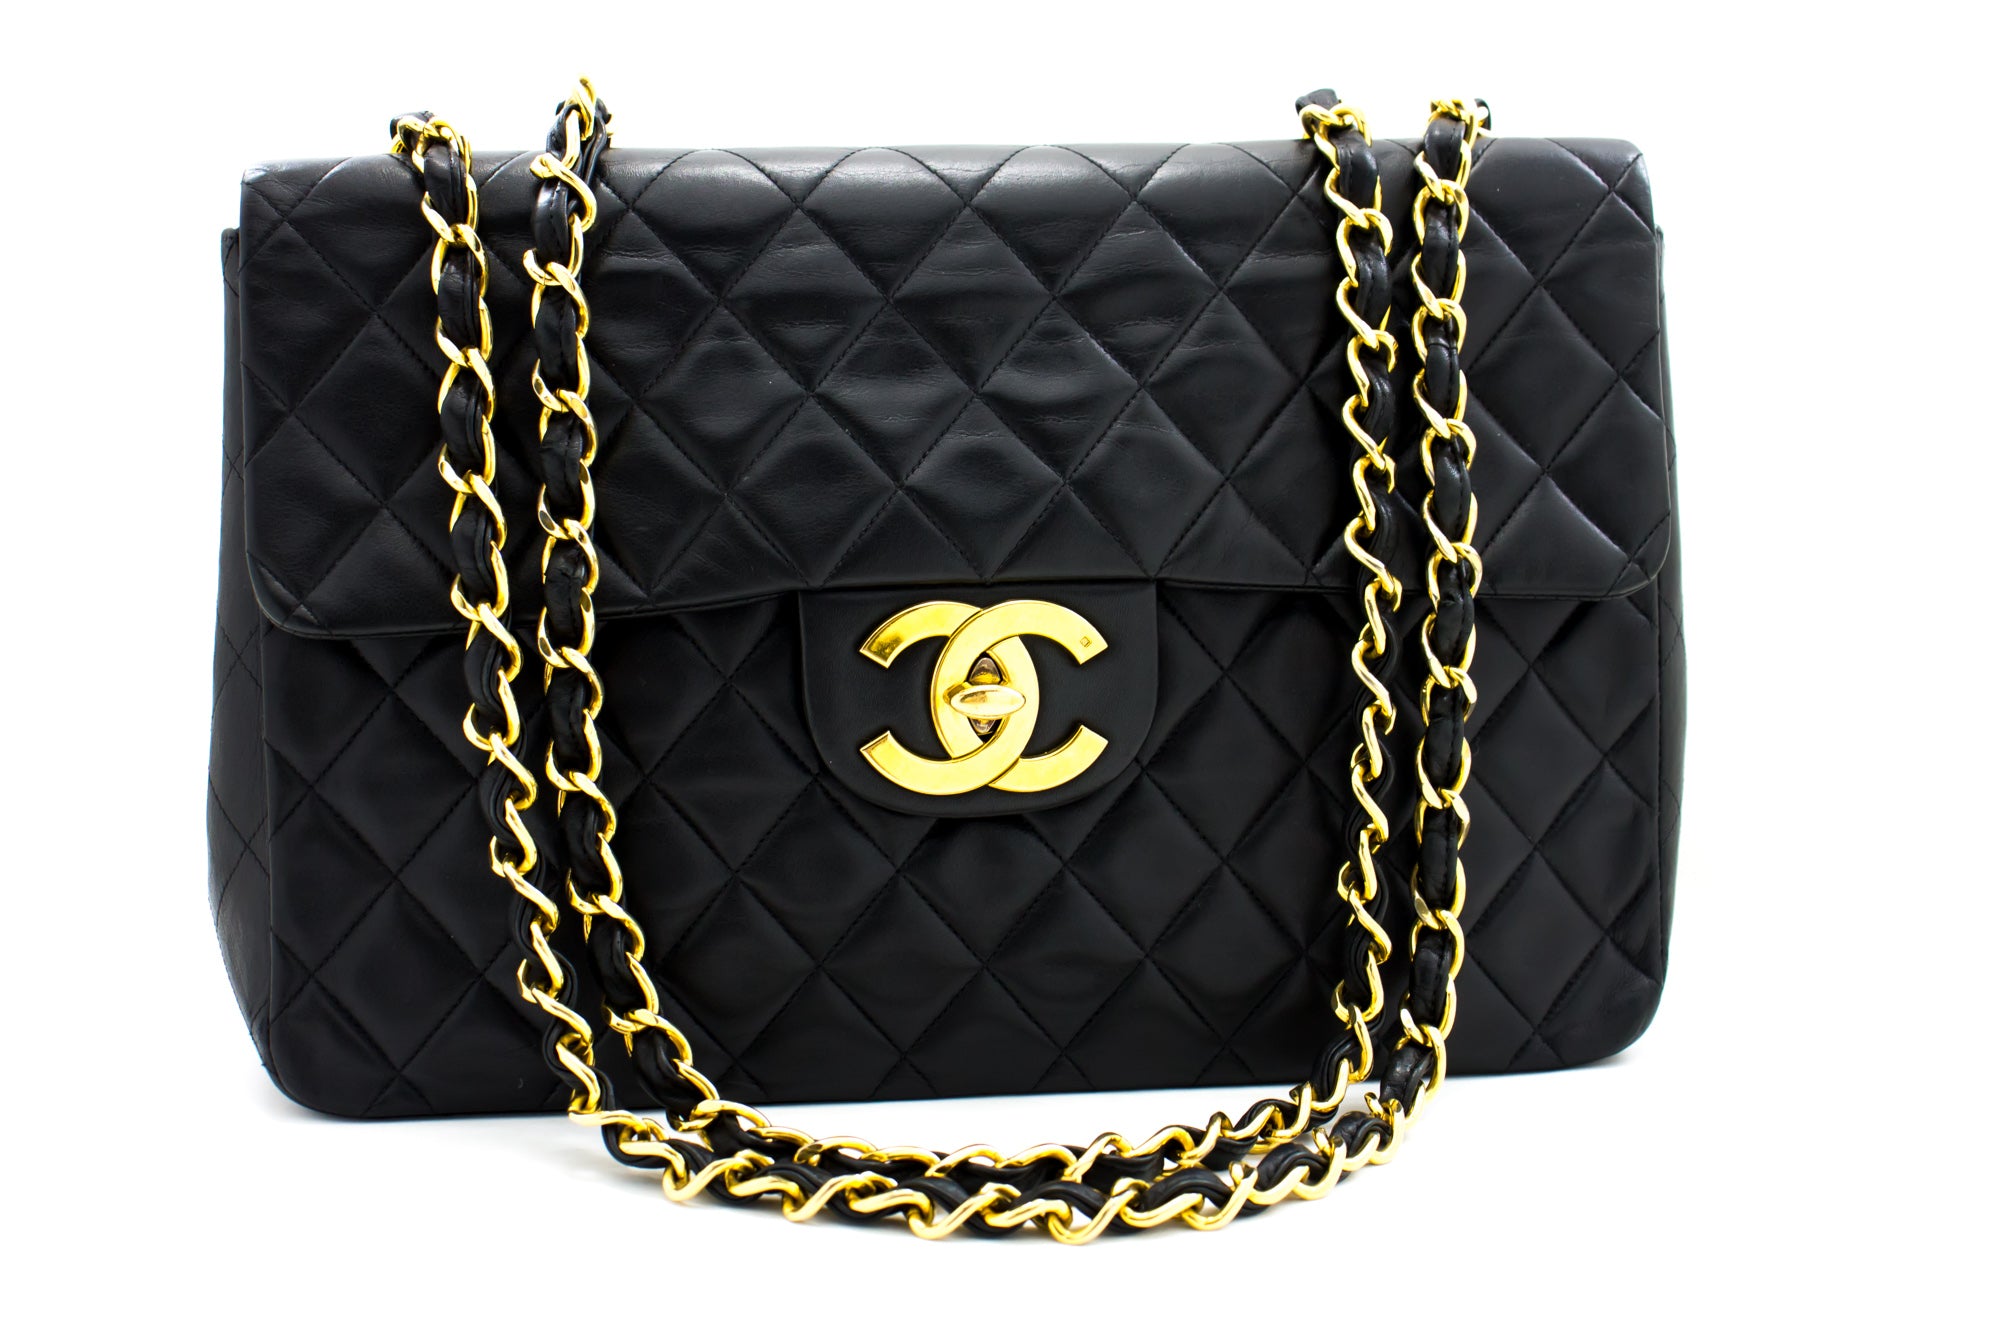 CHANEL Pre-Owned Double Flap Jumbo Shoulder Bag - Farfetch